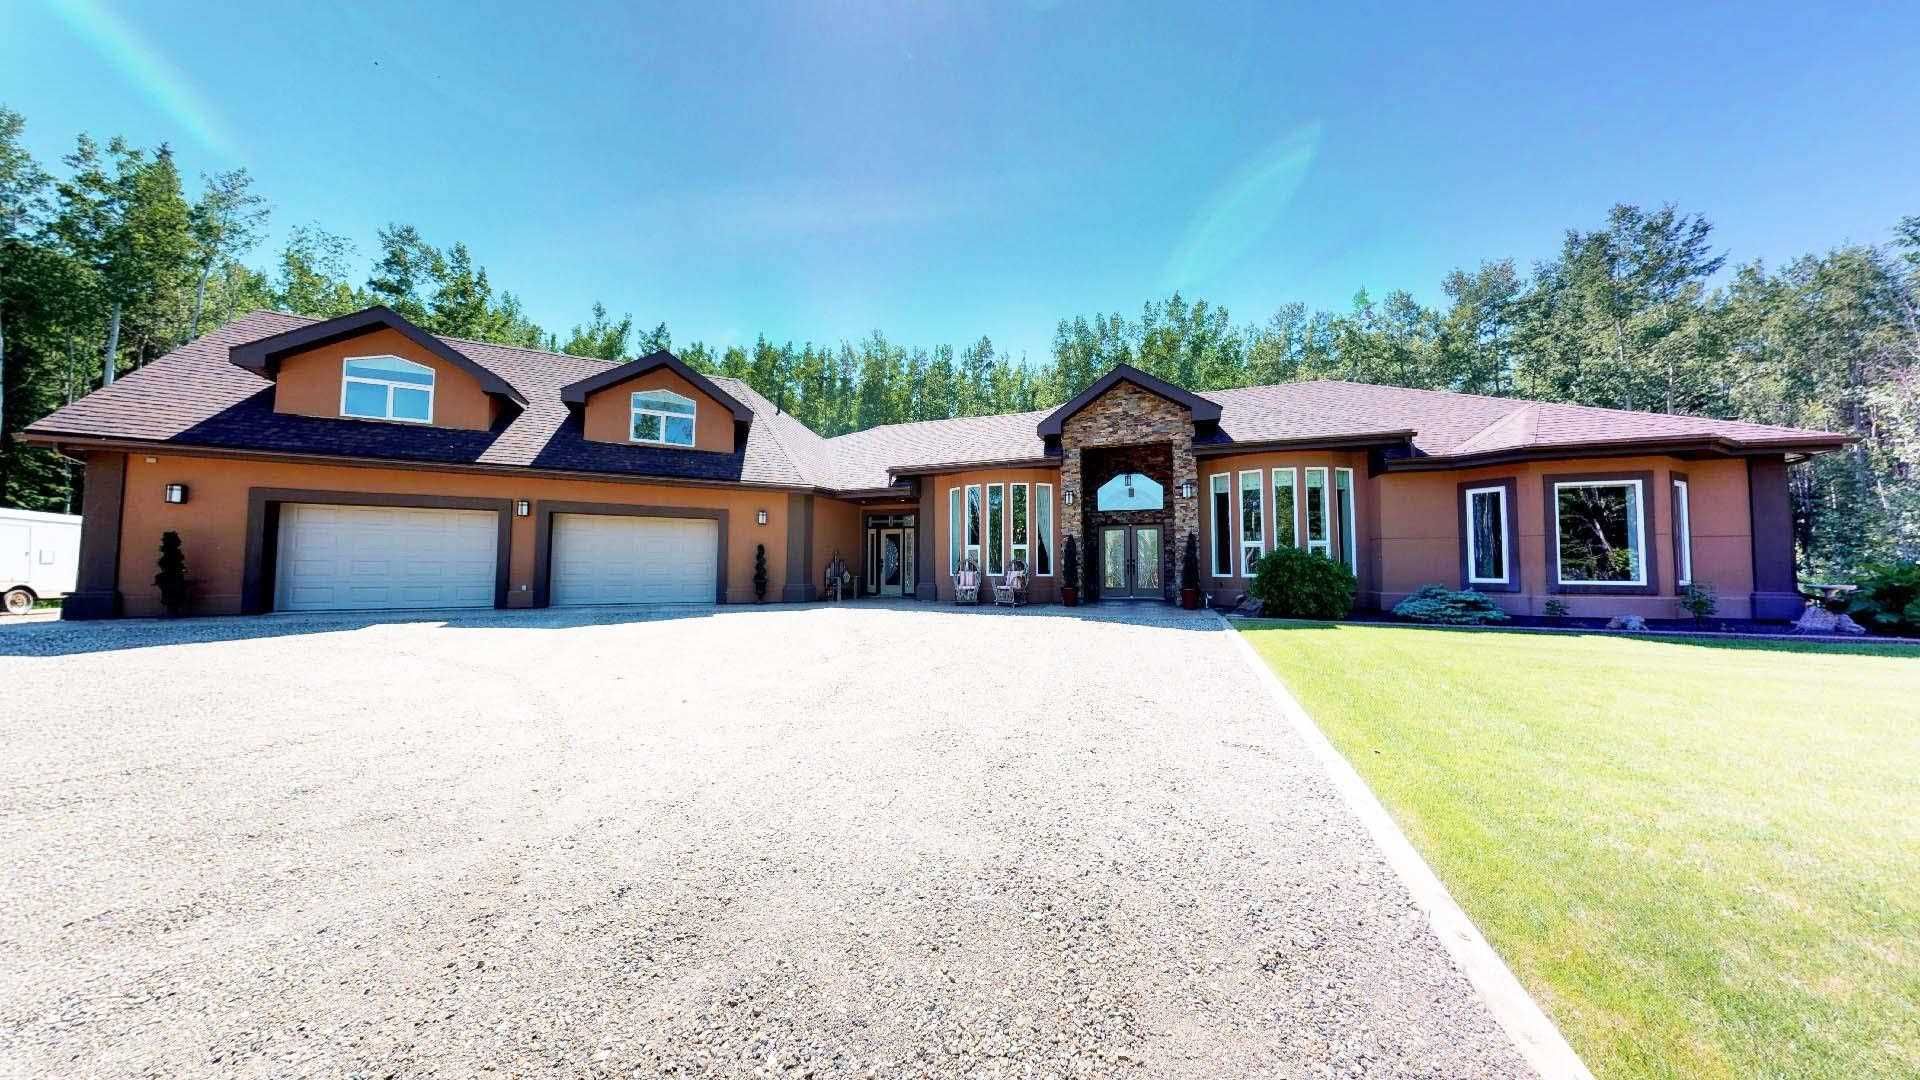 Main Photo: 13864 GOLF COURSE Road: Charlie Lake House for sale (Fort St. John (Zone 60))  : MLS®# R2600744